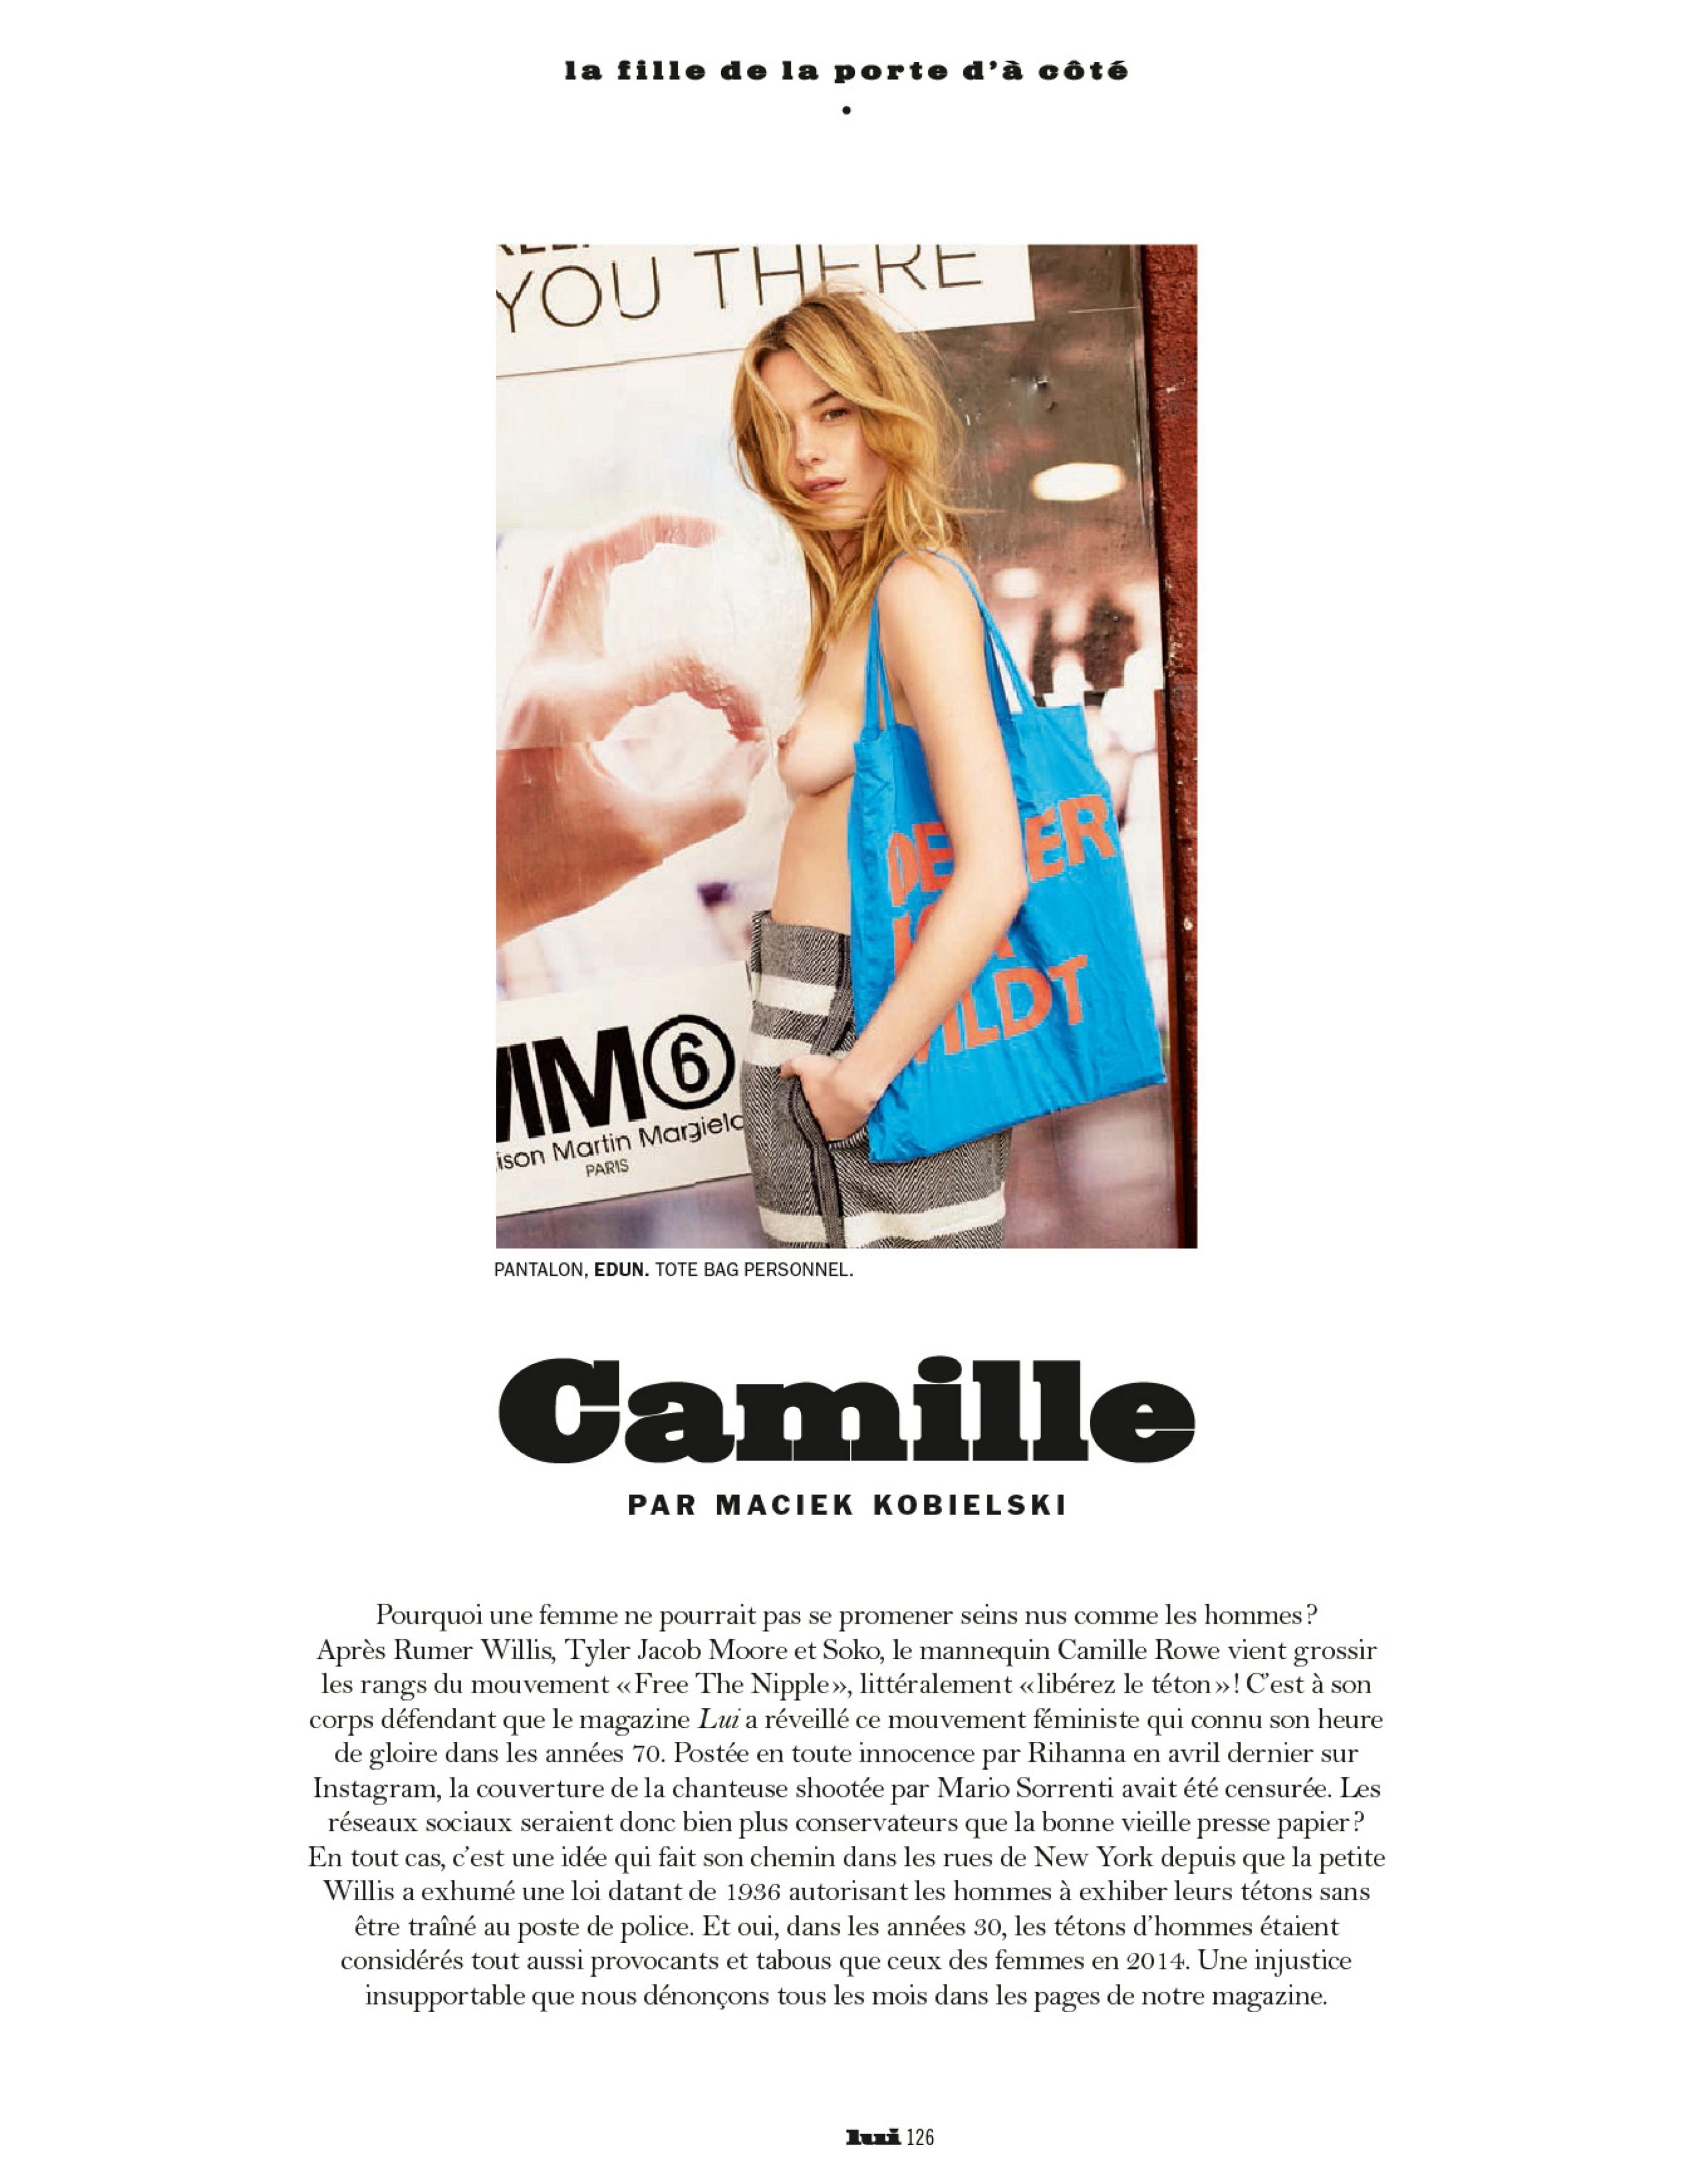 Camille Rowe topless for Lui Magazine